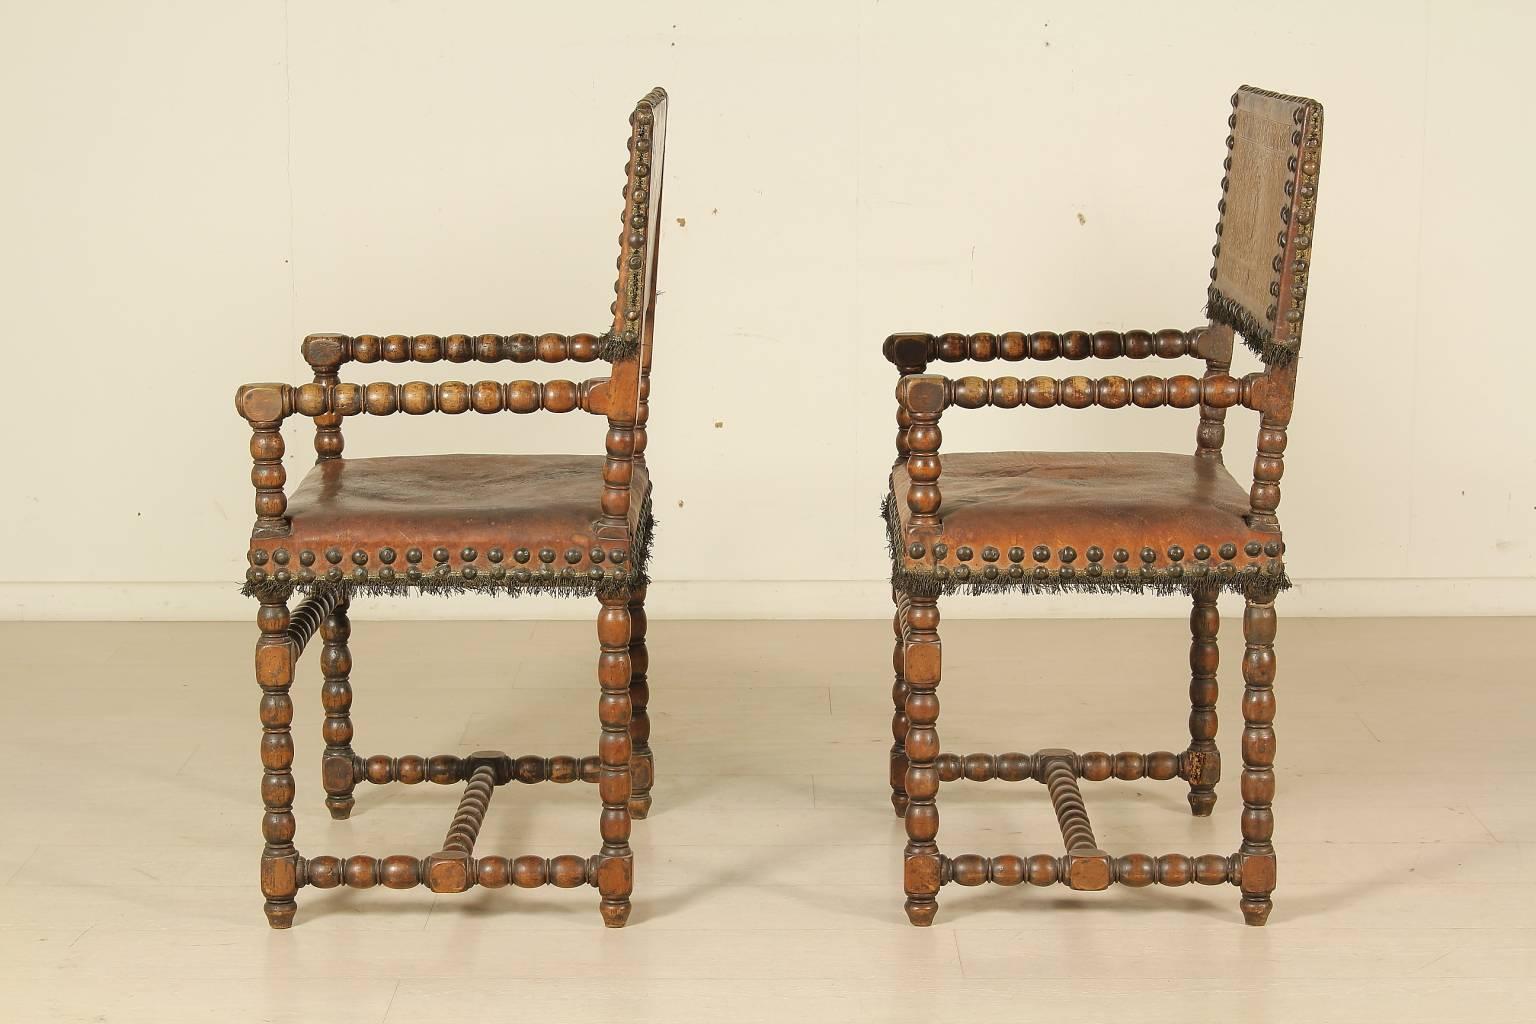 Two Renaissance 17th Century walnut and leather armchairs. Sphere-turned walnut wood, also on the armrests. Studded leather seat and backrest. On the backrests, the leather has got pressed arabesque and grotesque decorations on a gilt background.